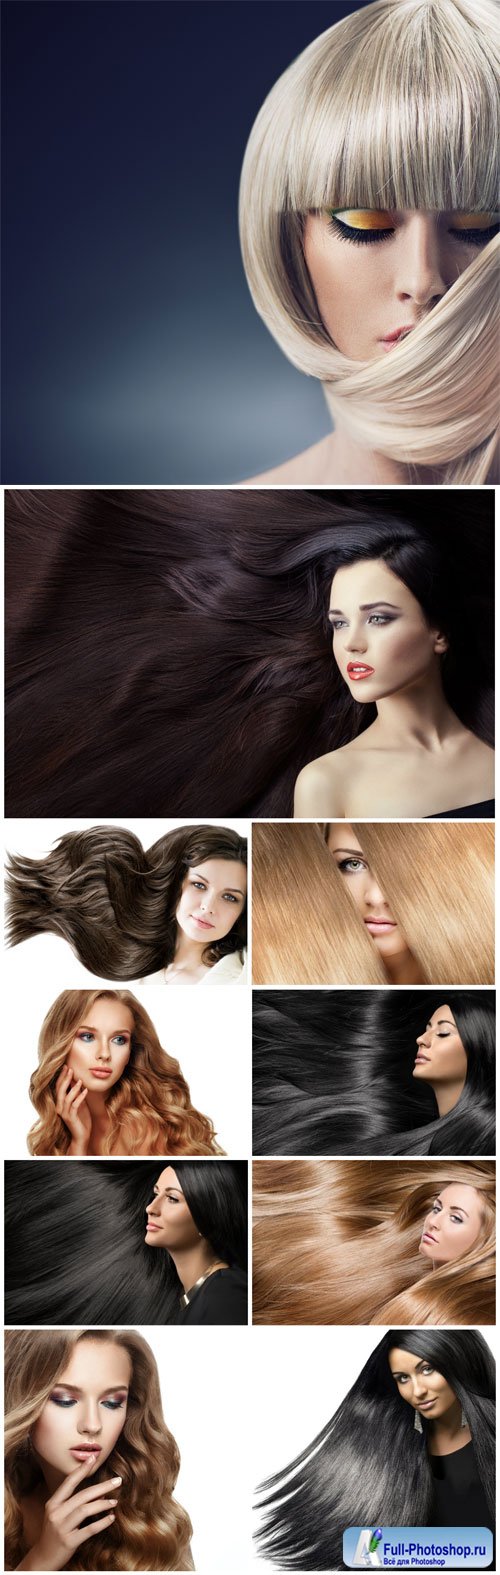 Girls with luxurious long hair - Stock photo